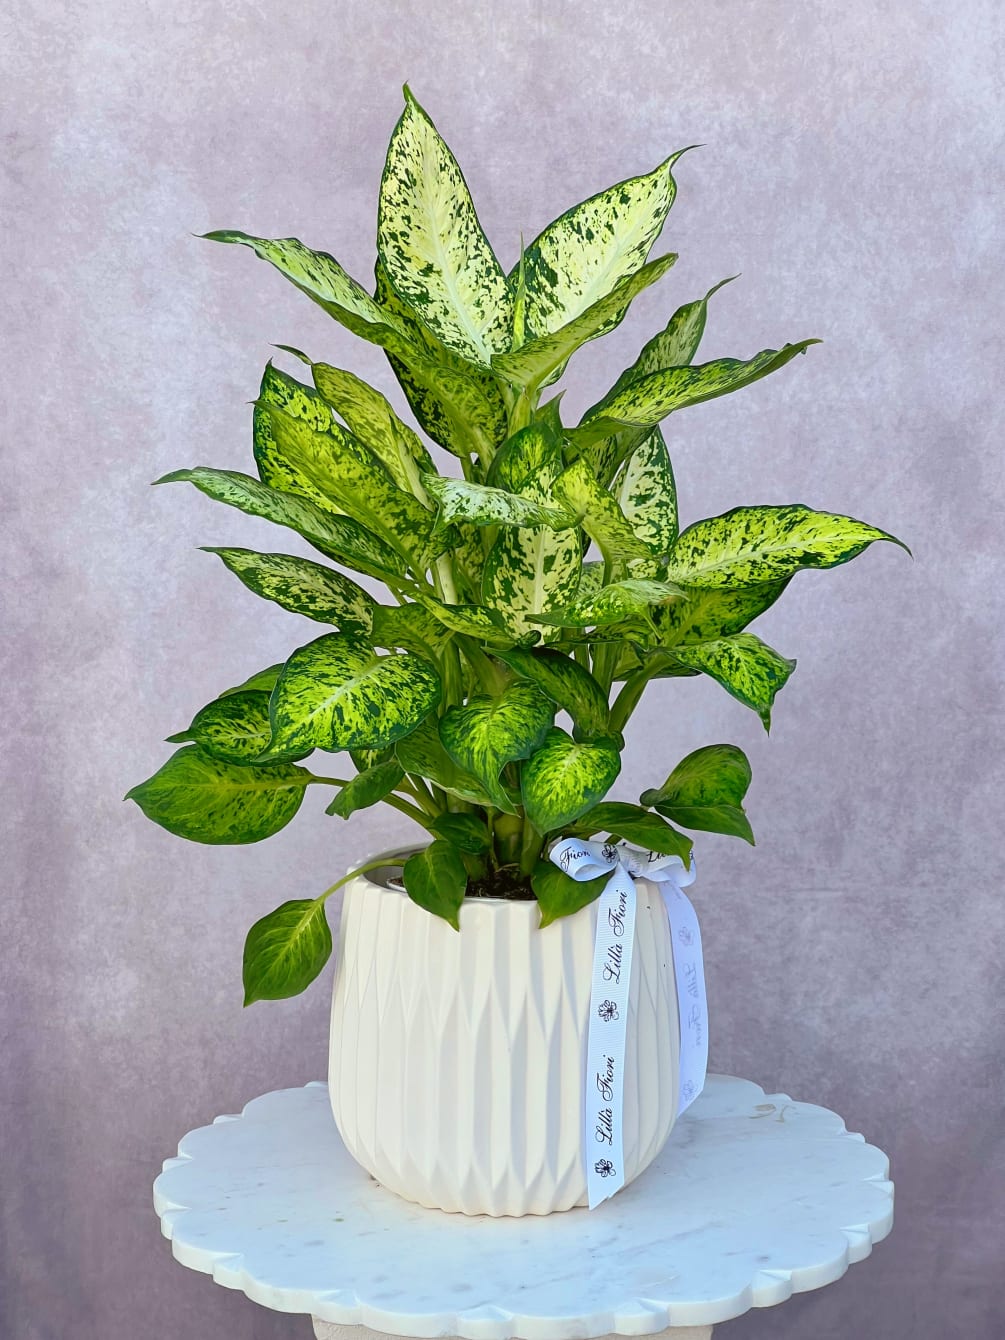 Dieffenbachia prefers diffused sunlight or partial shade, but will tolerate full shade